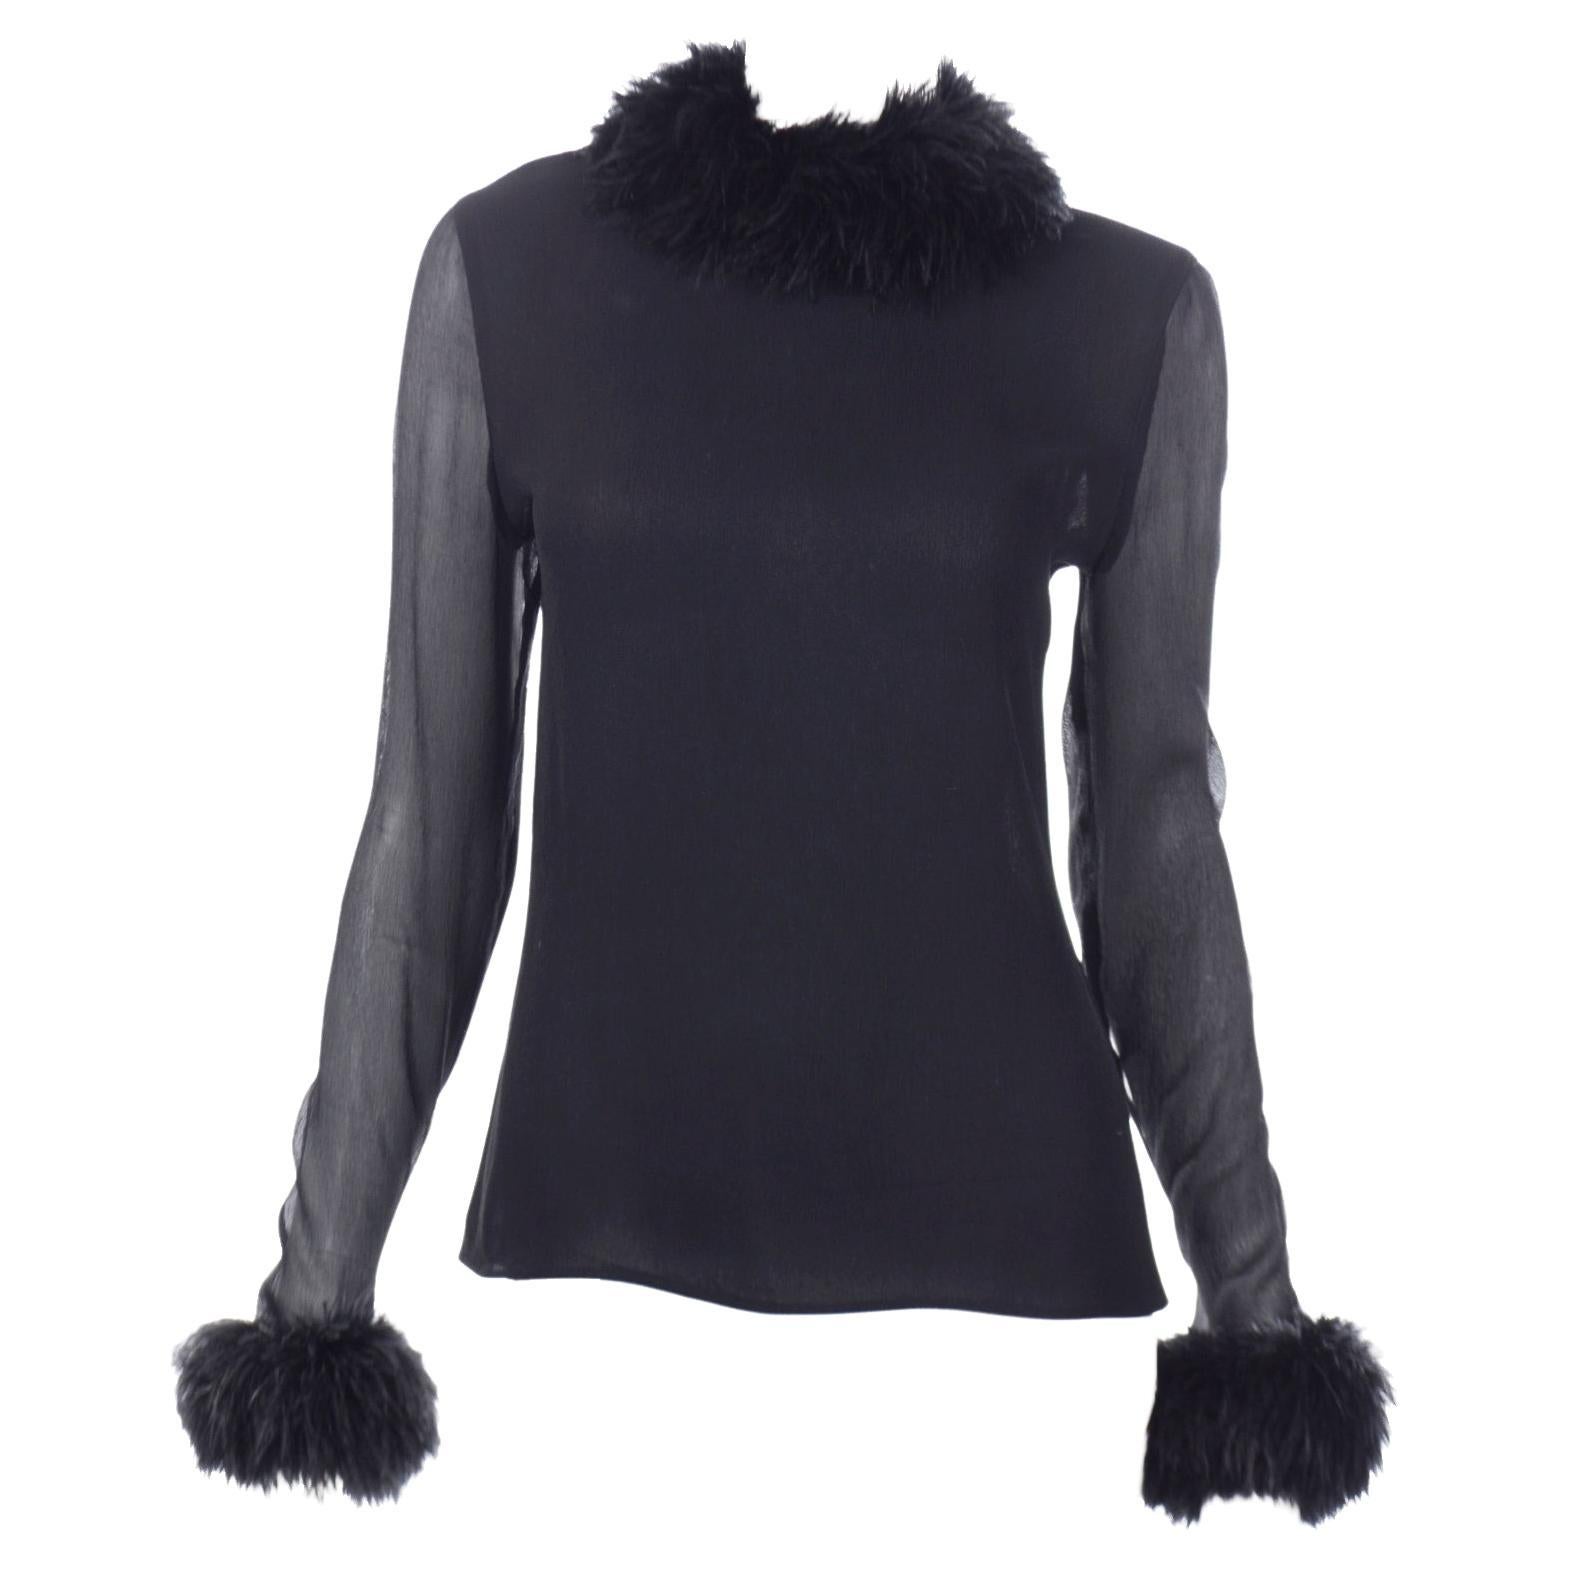 Valentino Boutique Vintage Black Long Sleeve Top w Marabou Feathers